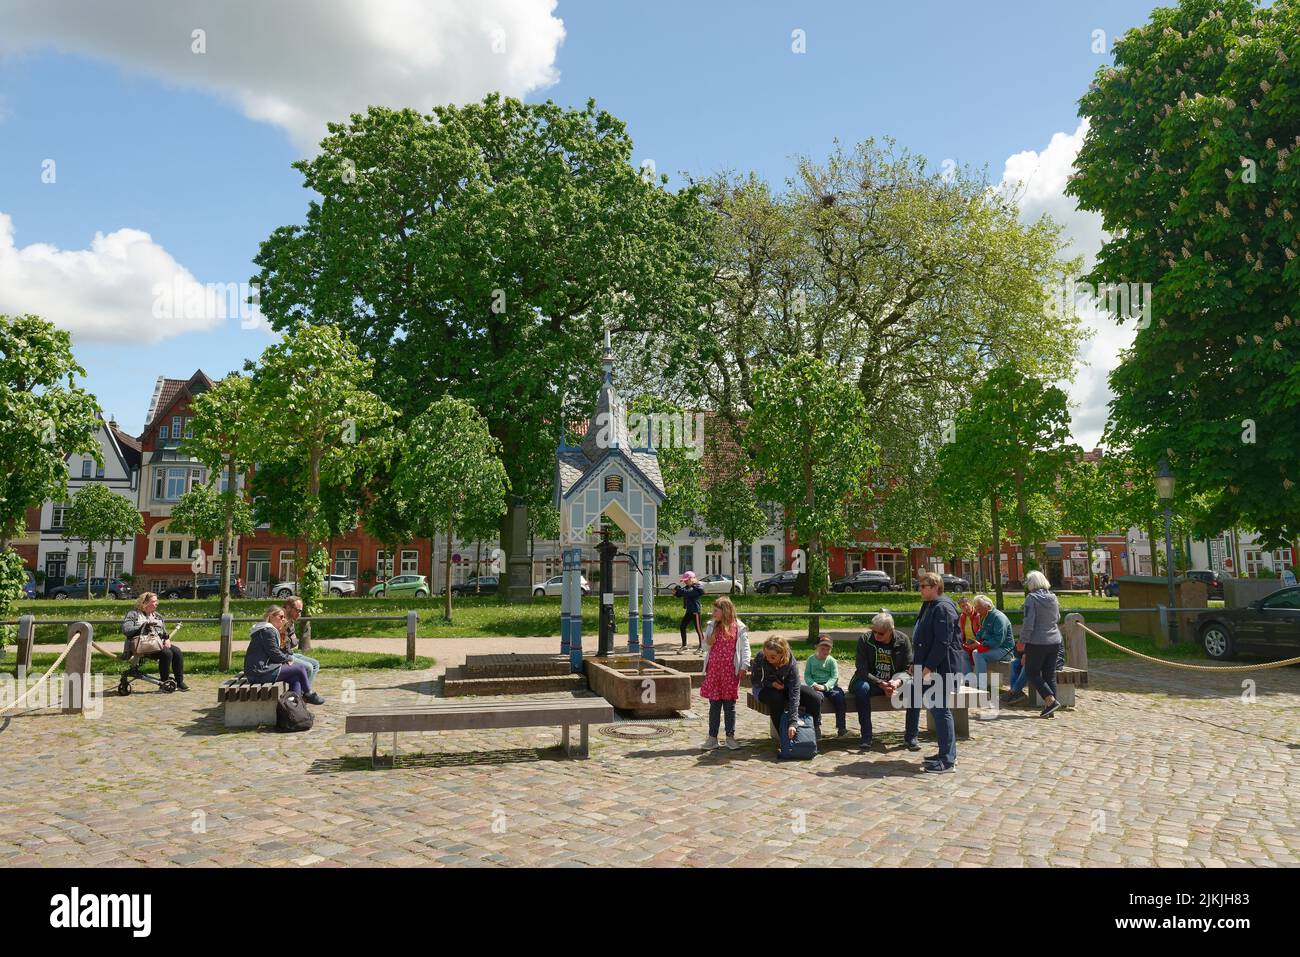 Market pump at the market place of Friedrichstadt, Friedrichstadt, the Dutch town on the Eiderstedt peninsula, North Frisia, Eiderstedt peninsula, Schleswig-Holstein, Germany Stock Photo